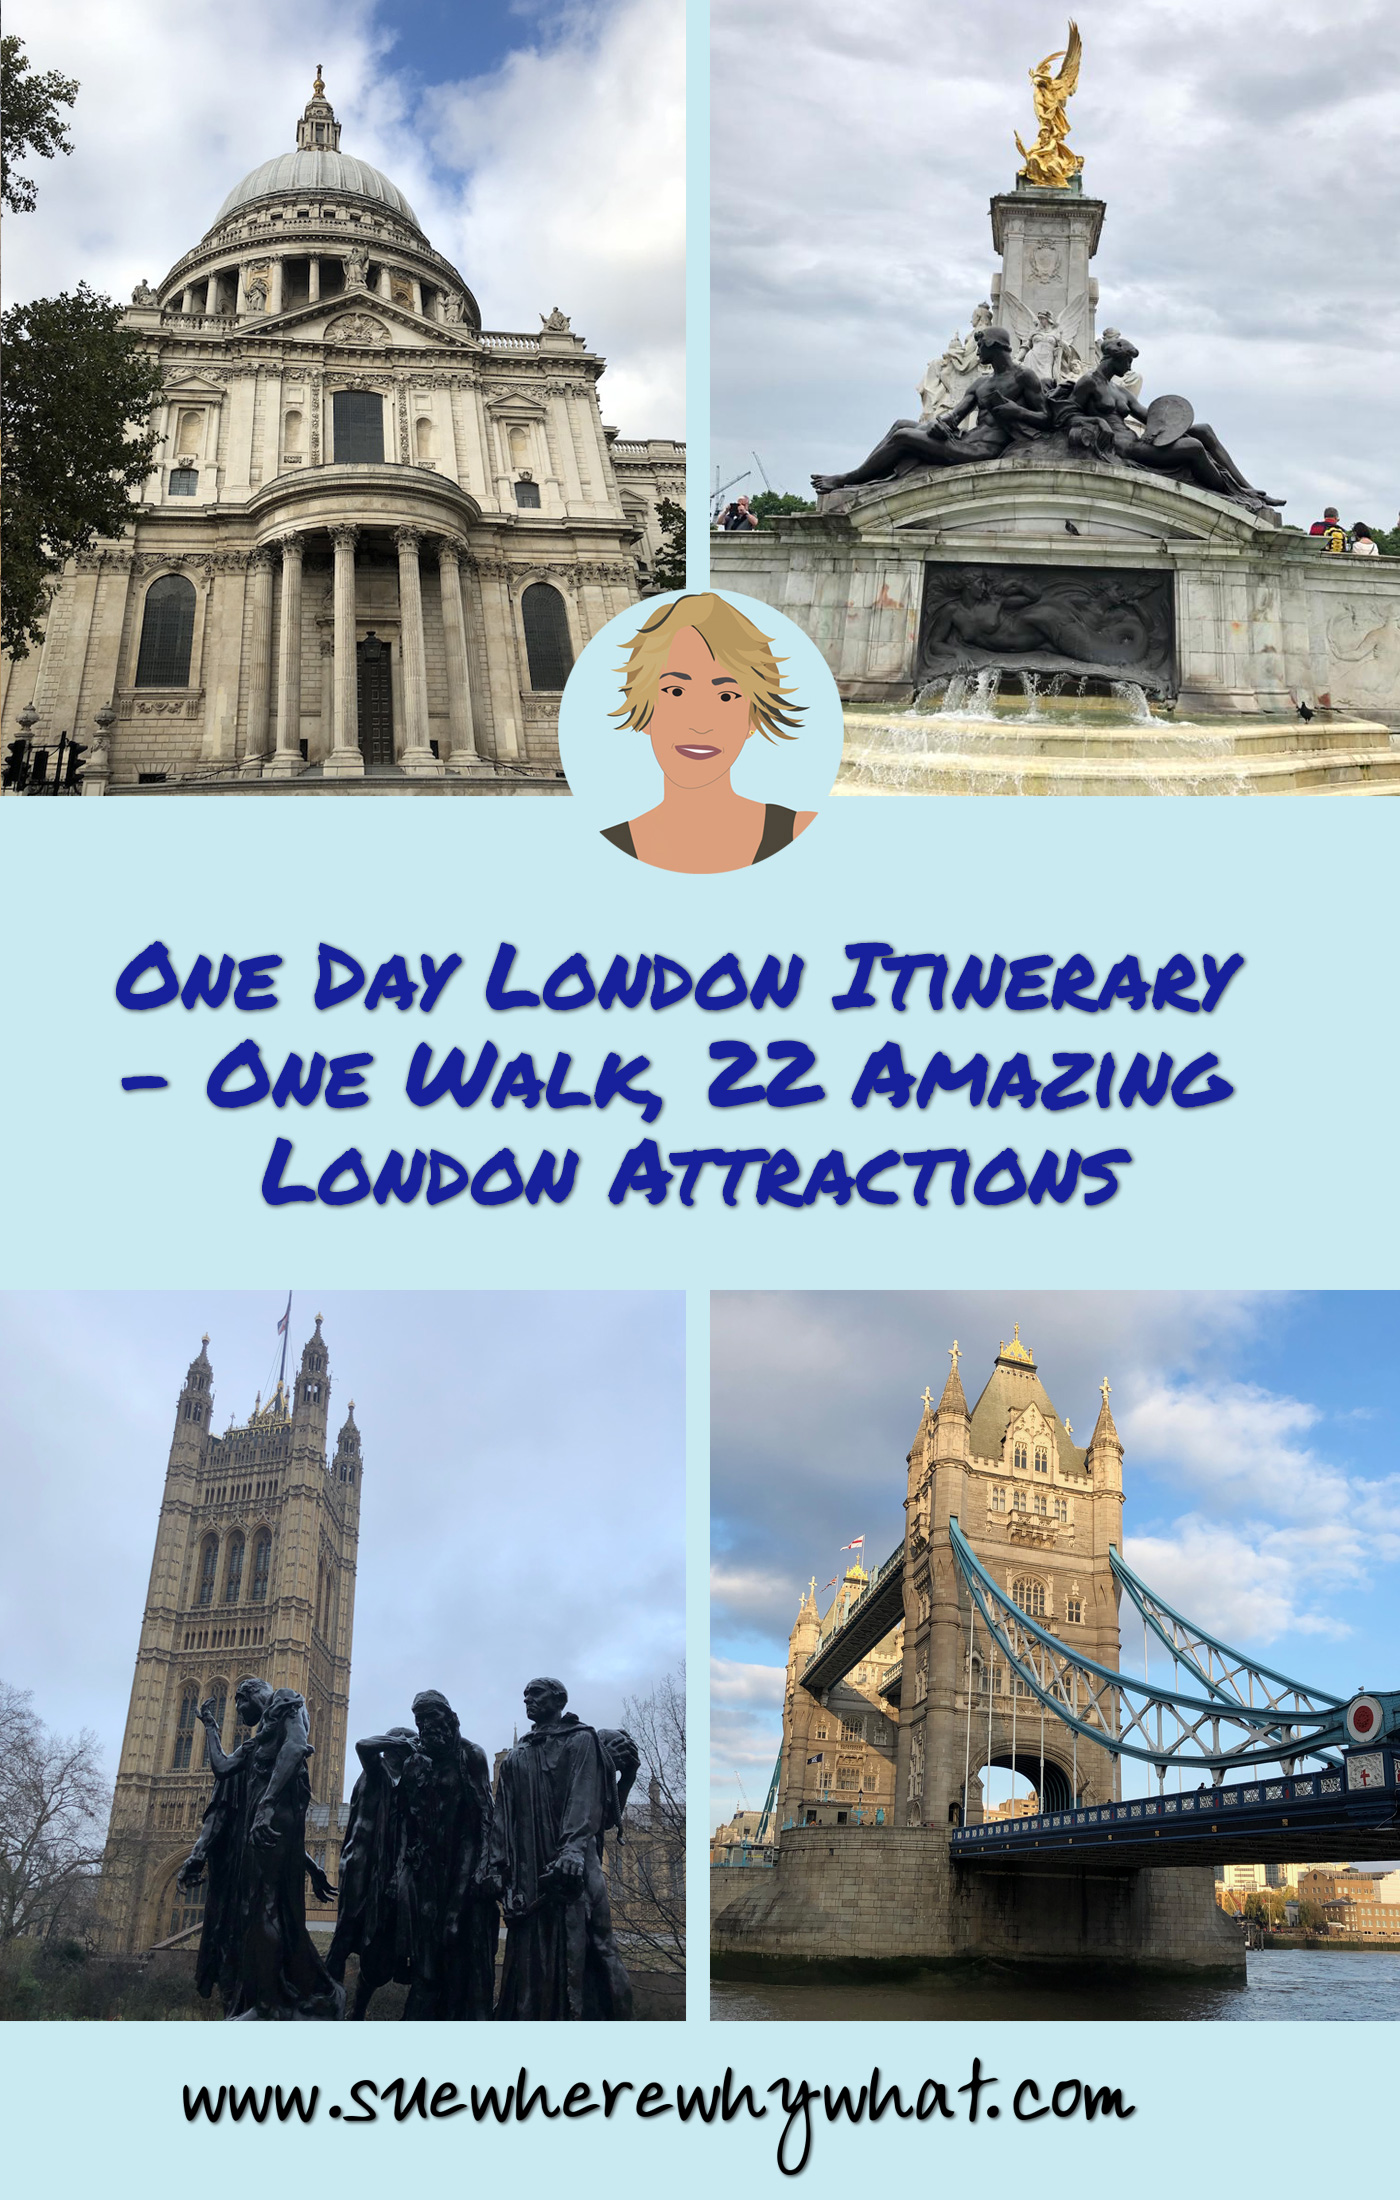 One Day London Itinerary – One Walk, 22 Amazing London Attractions